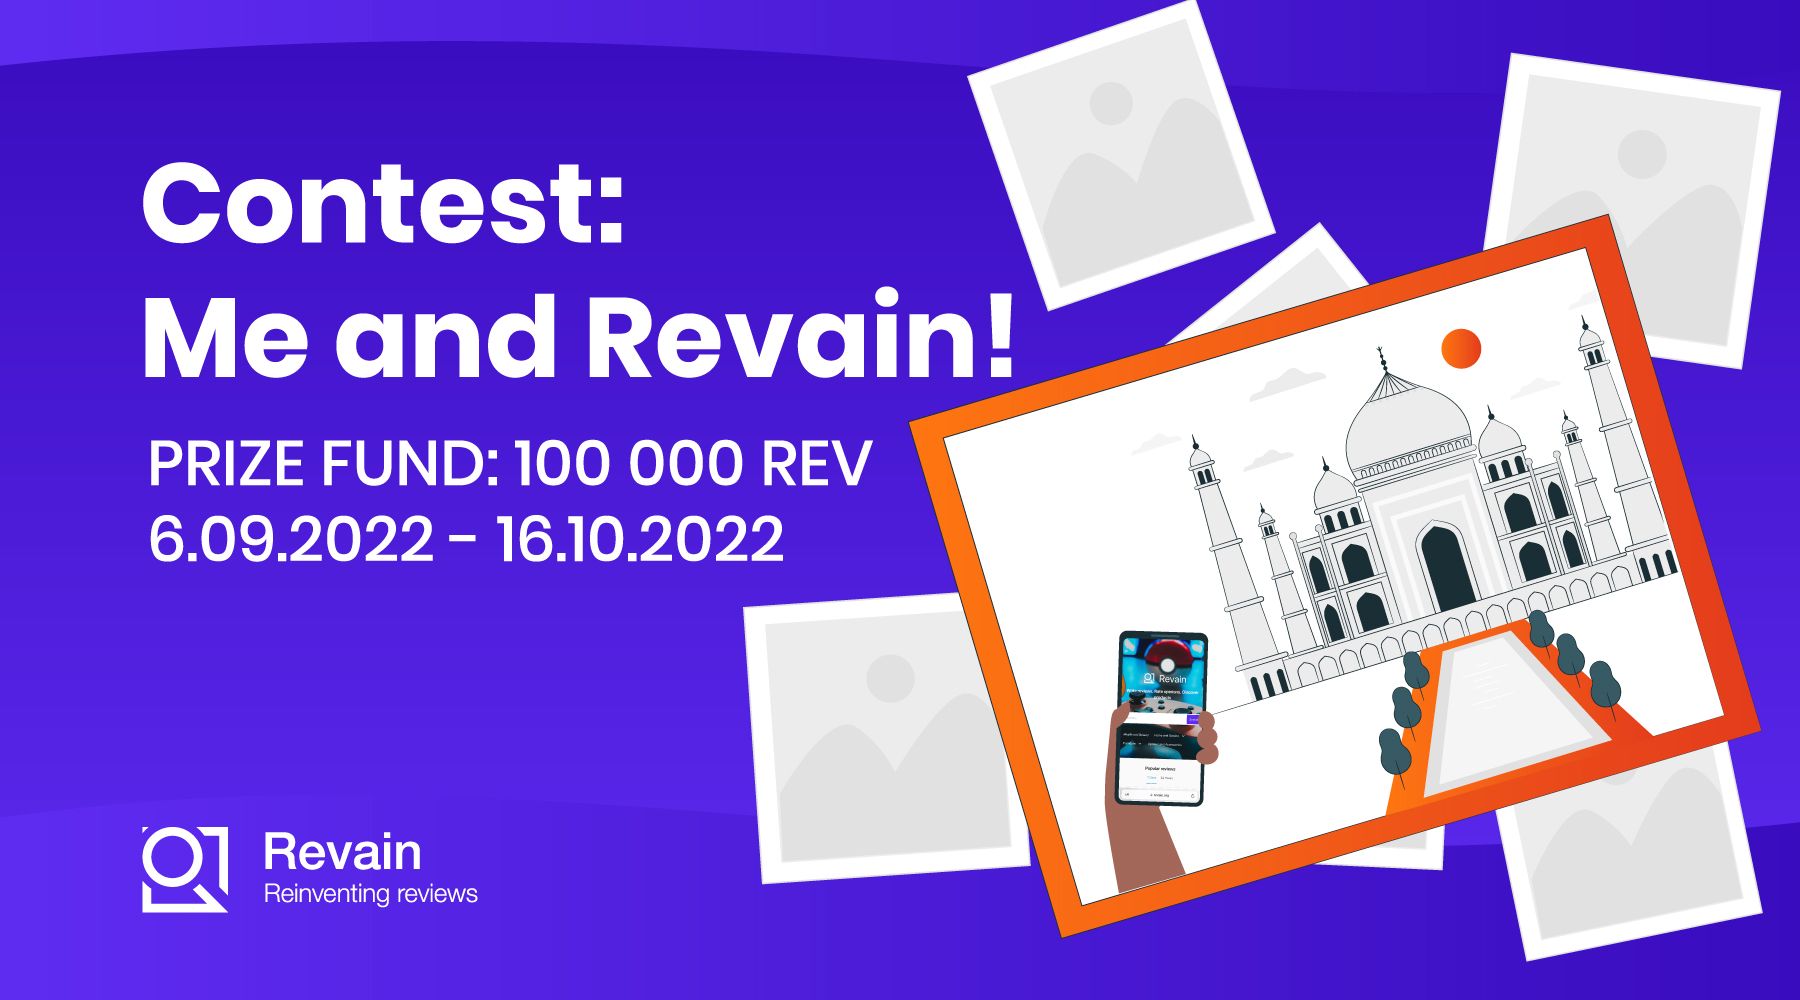 Article Me and Revain: photo contest!